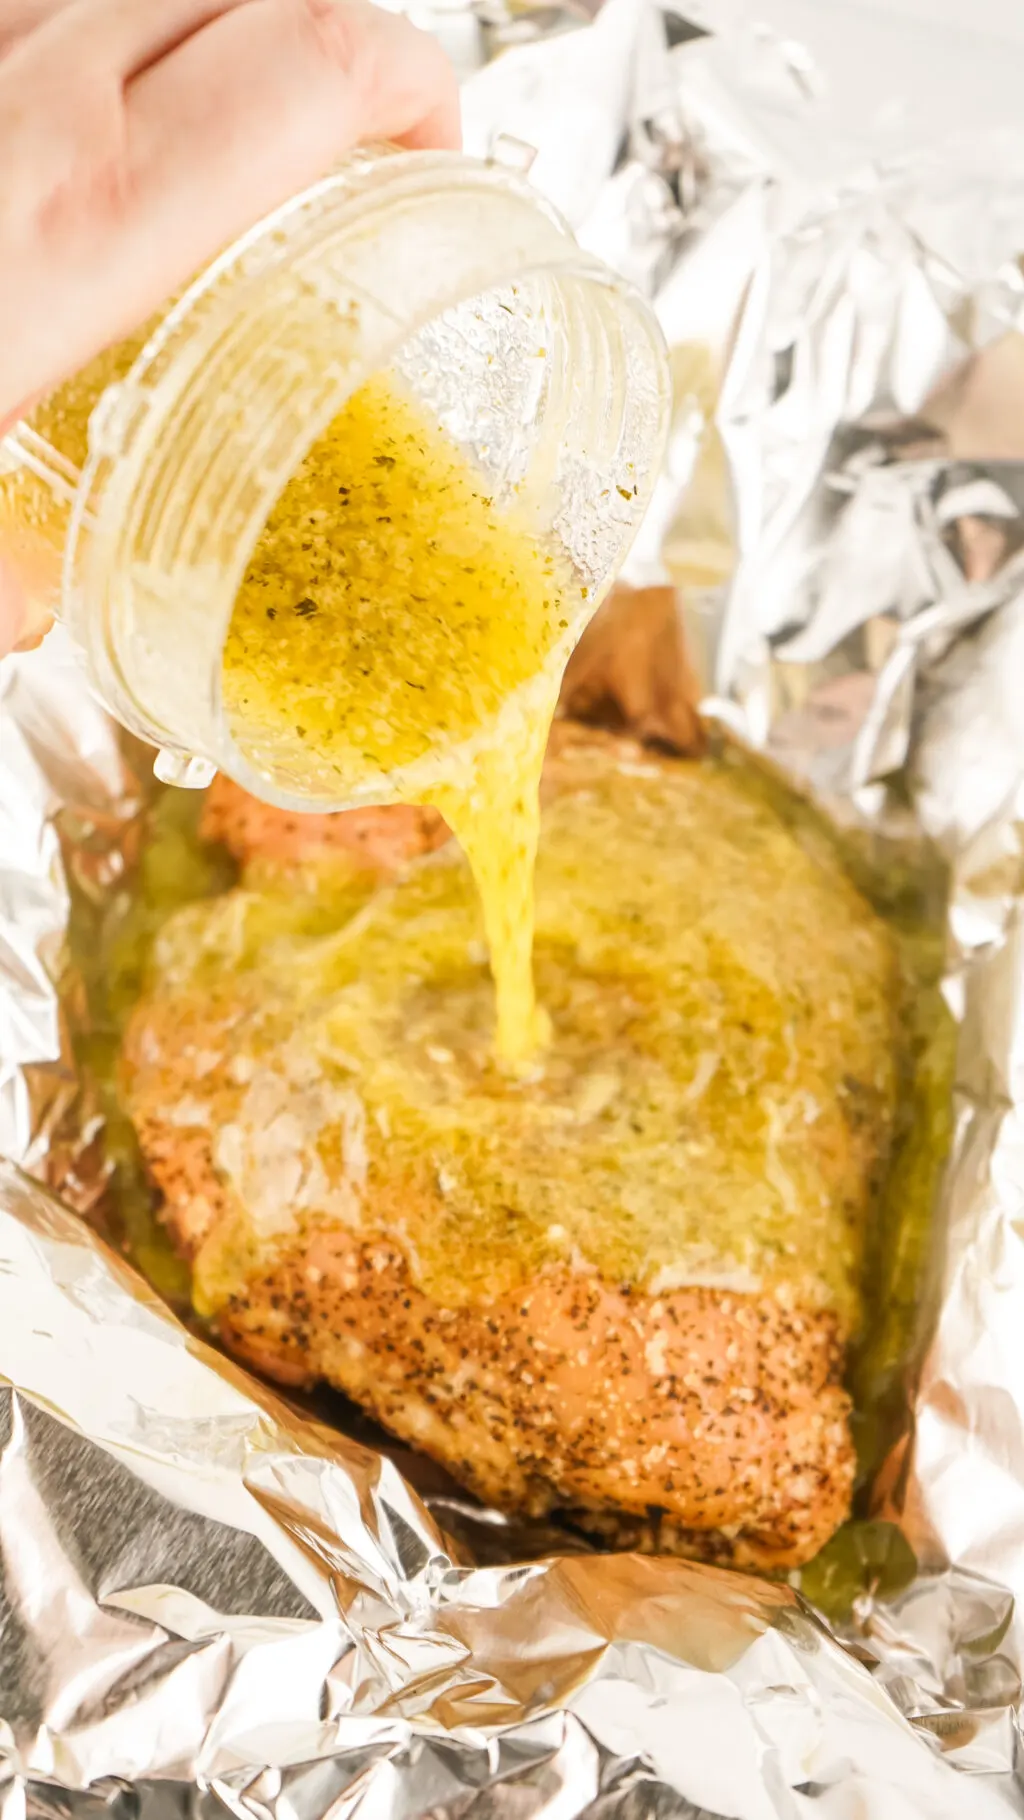 butter being poured into foil packet with smoked turkey breast